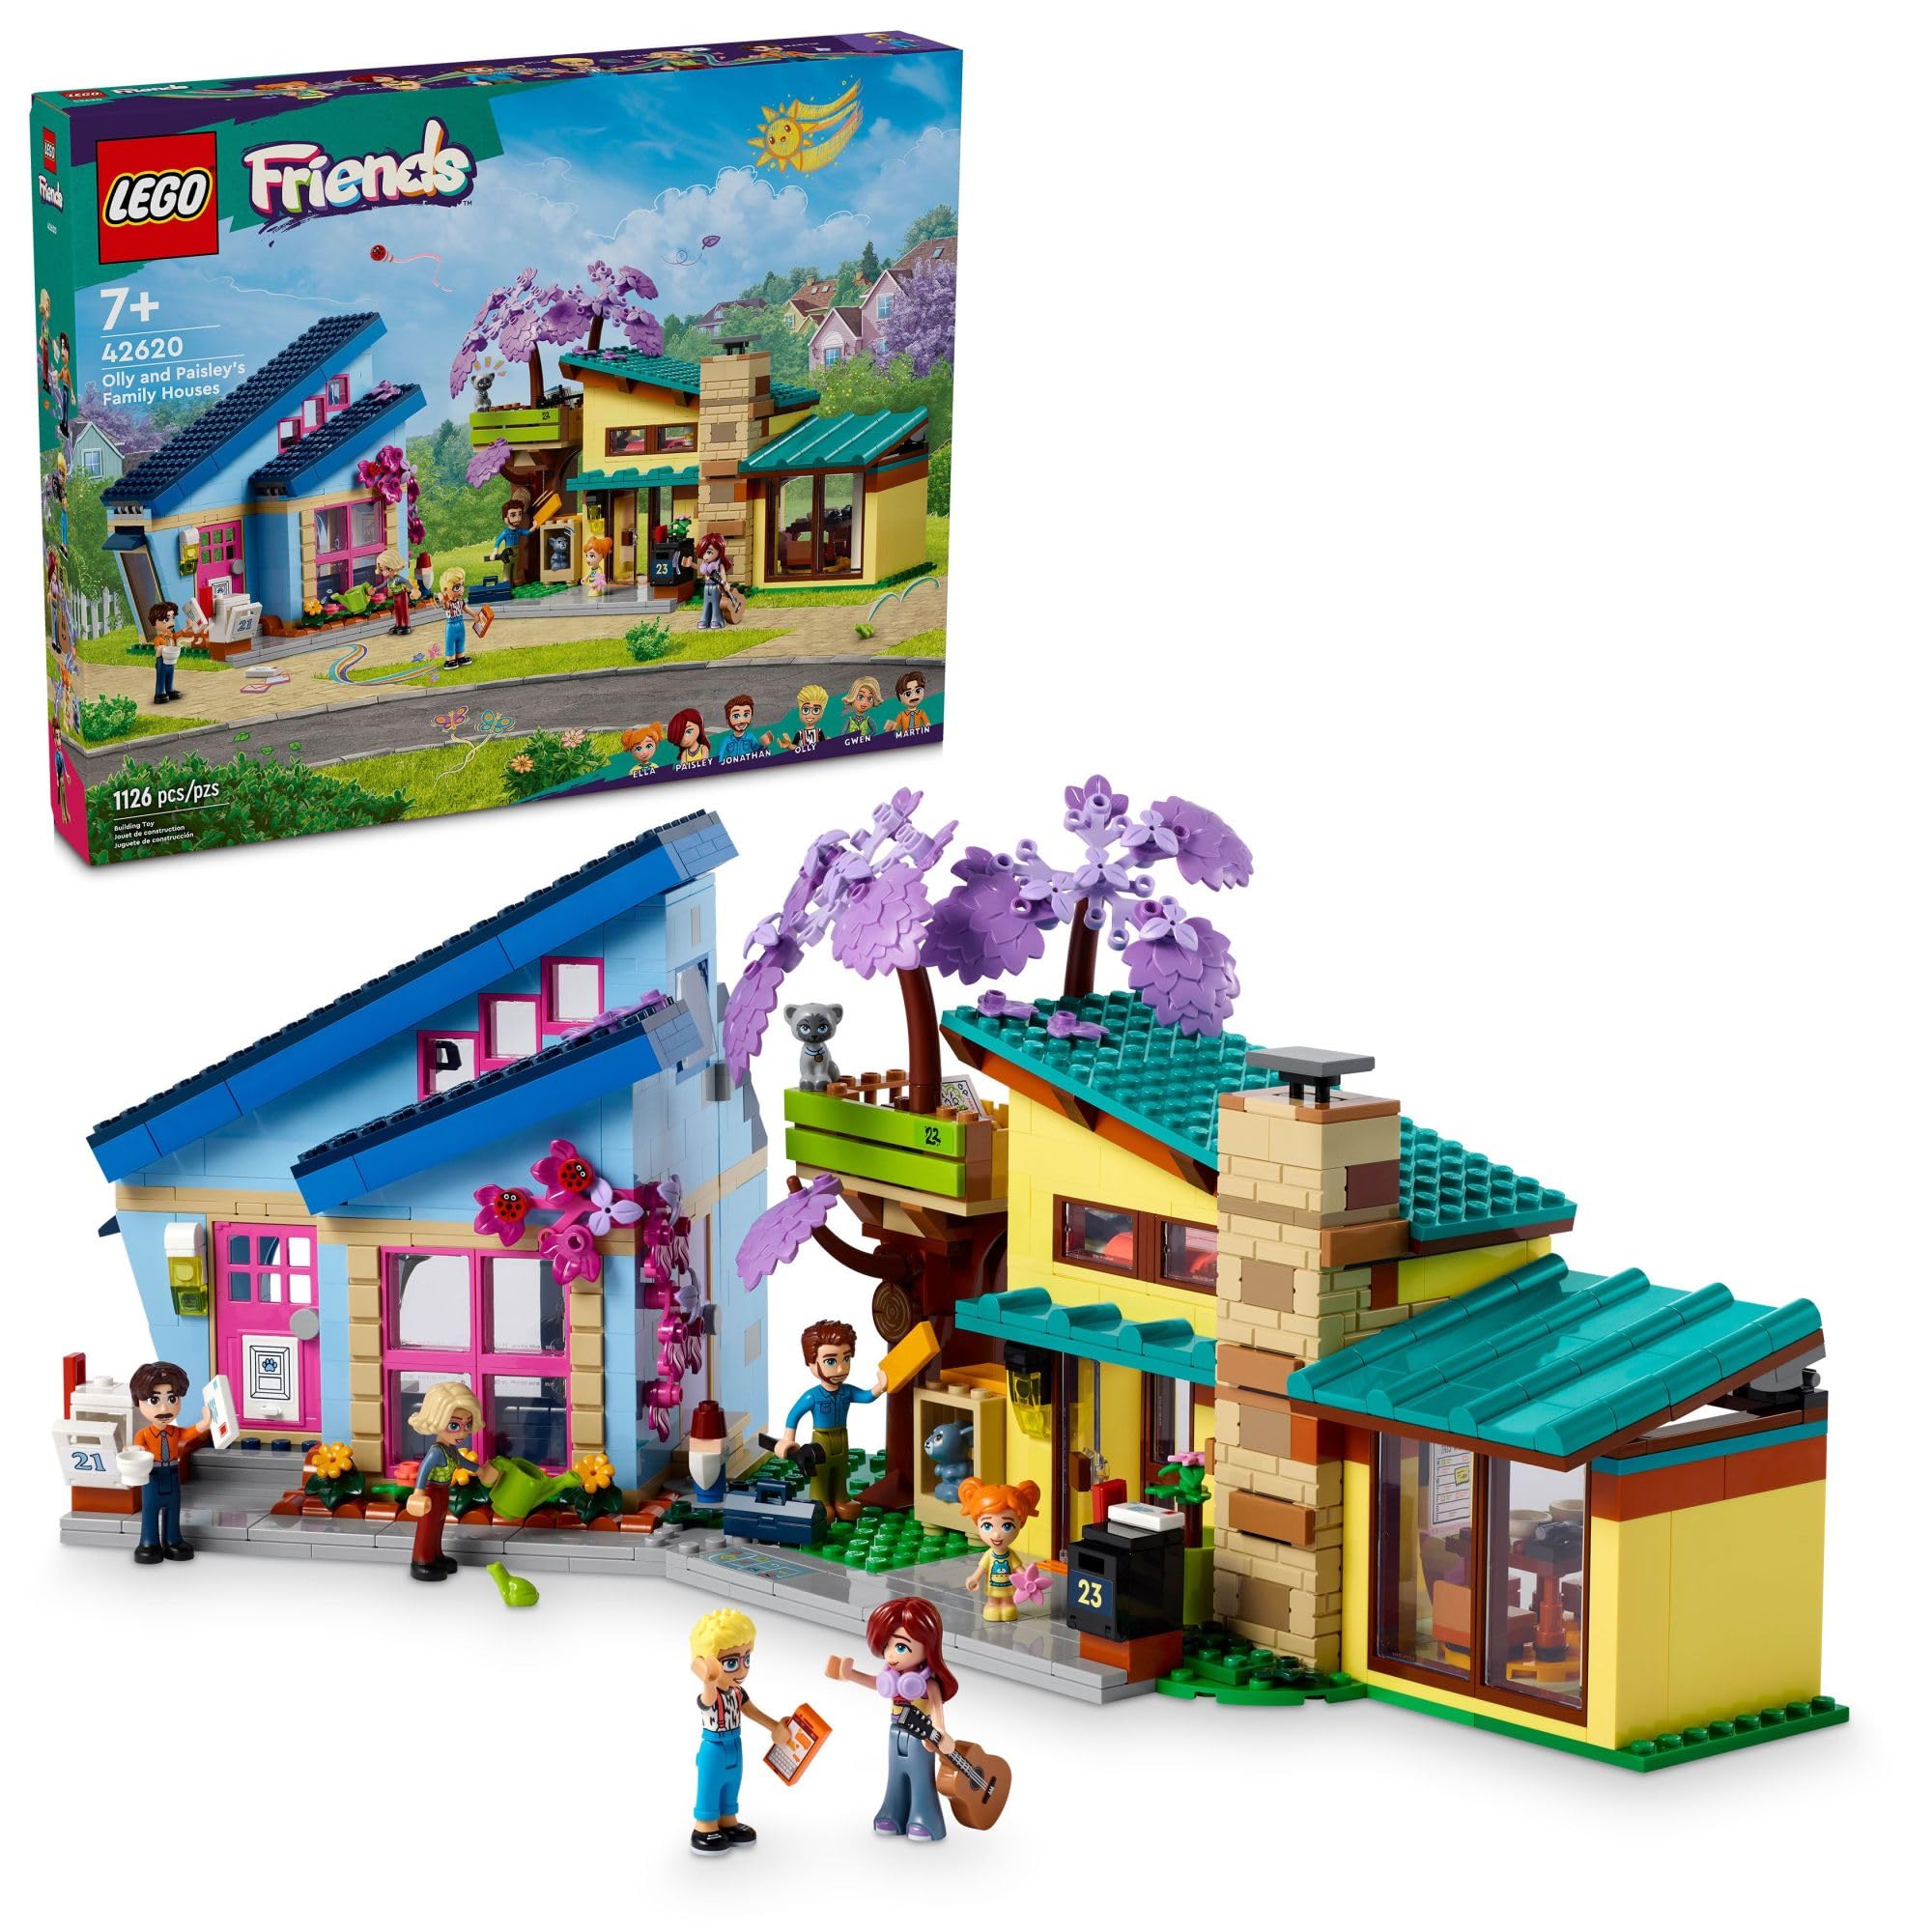 LEGO Friends Olly and Paisley's Family Houses Toy for Kids with 5 Mini-Doll Figures for Creative Play, Two-Story Home with Treehouse Toy, Dollhouse Toy Gift Idea for Girls and Boys Ages 7+, 42620